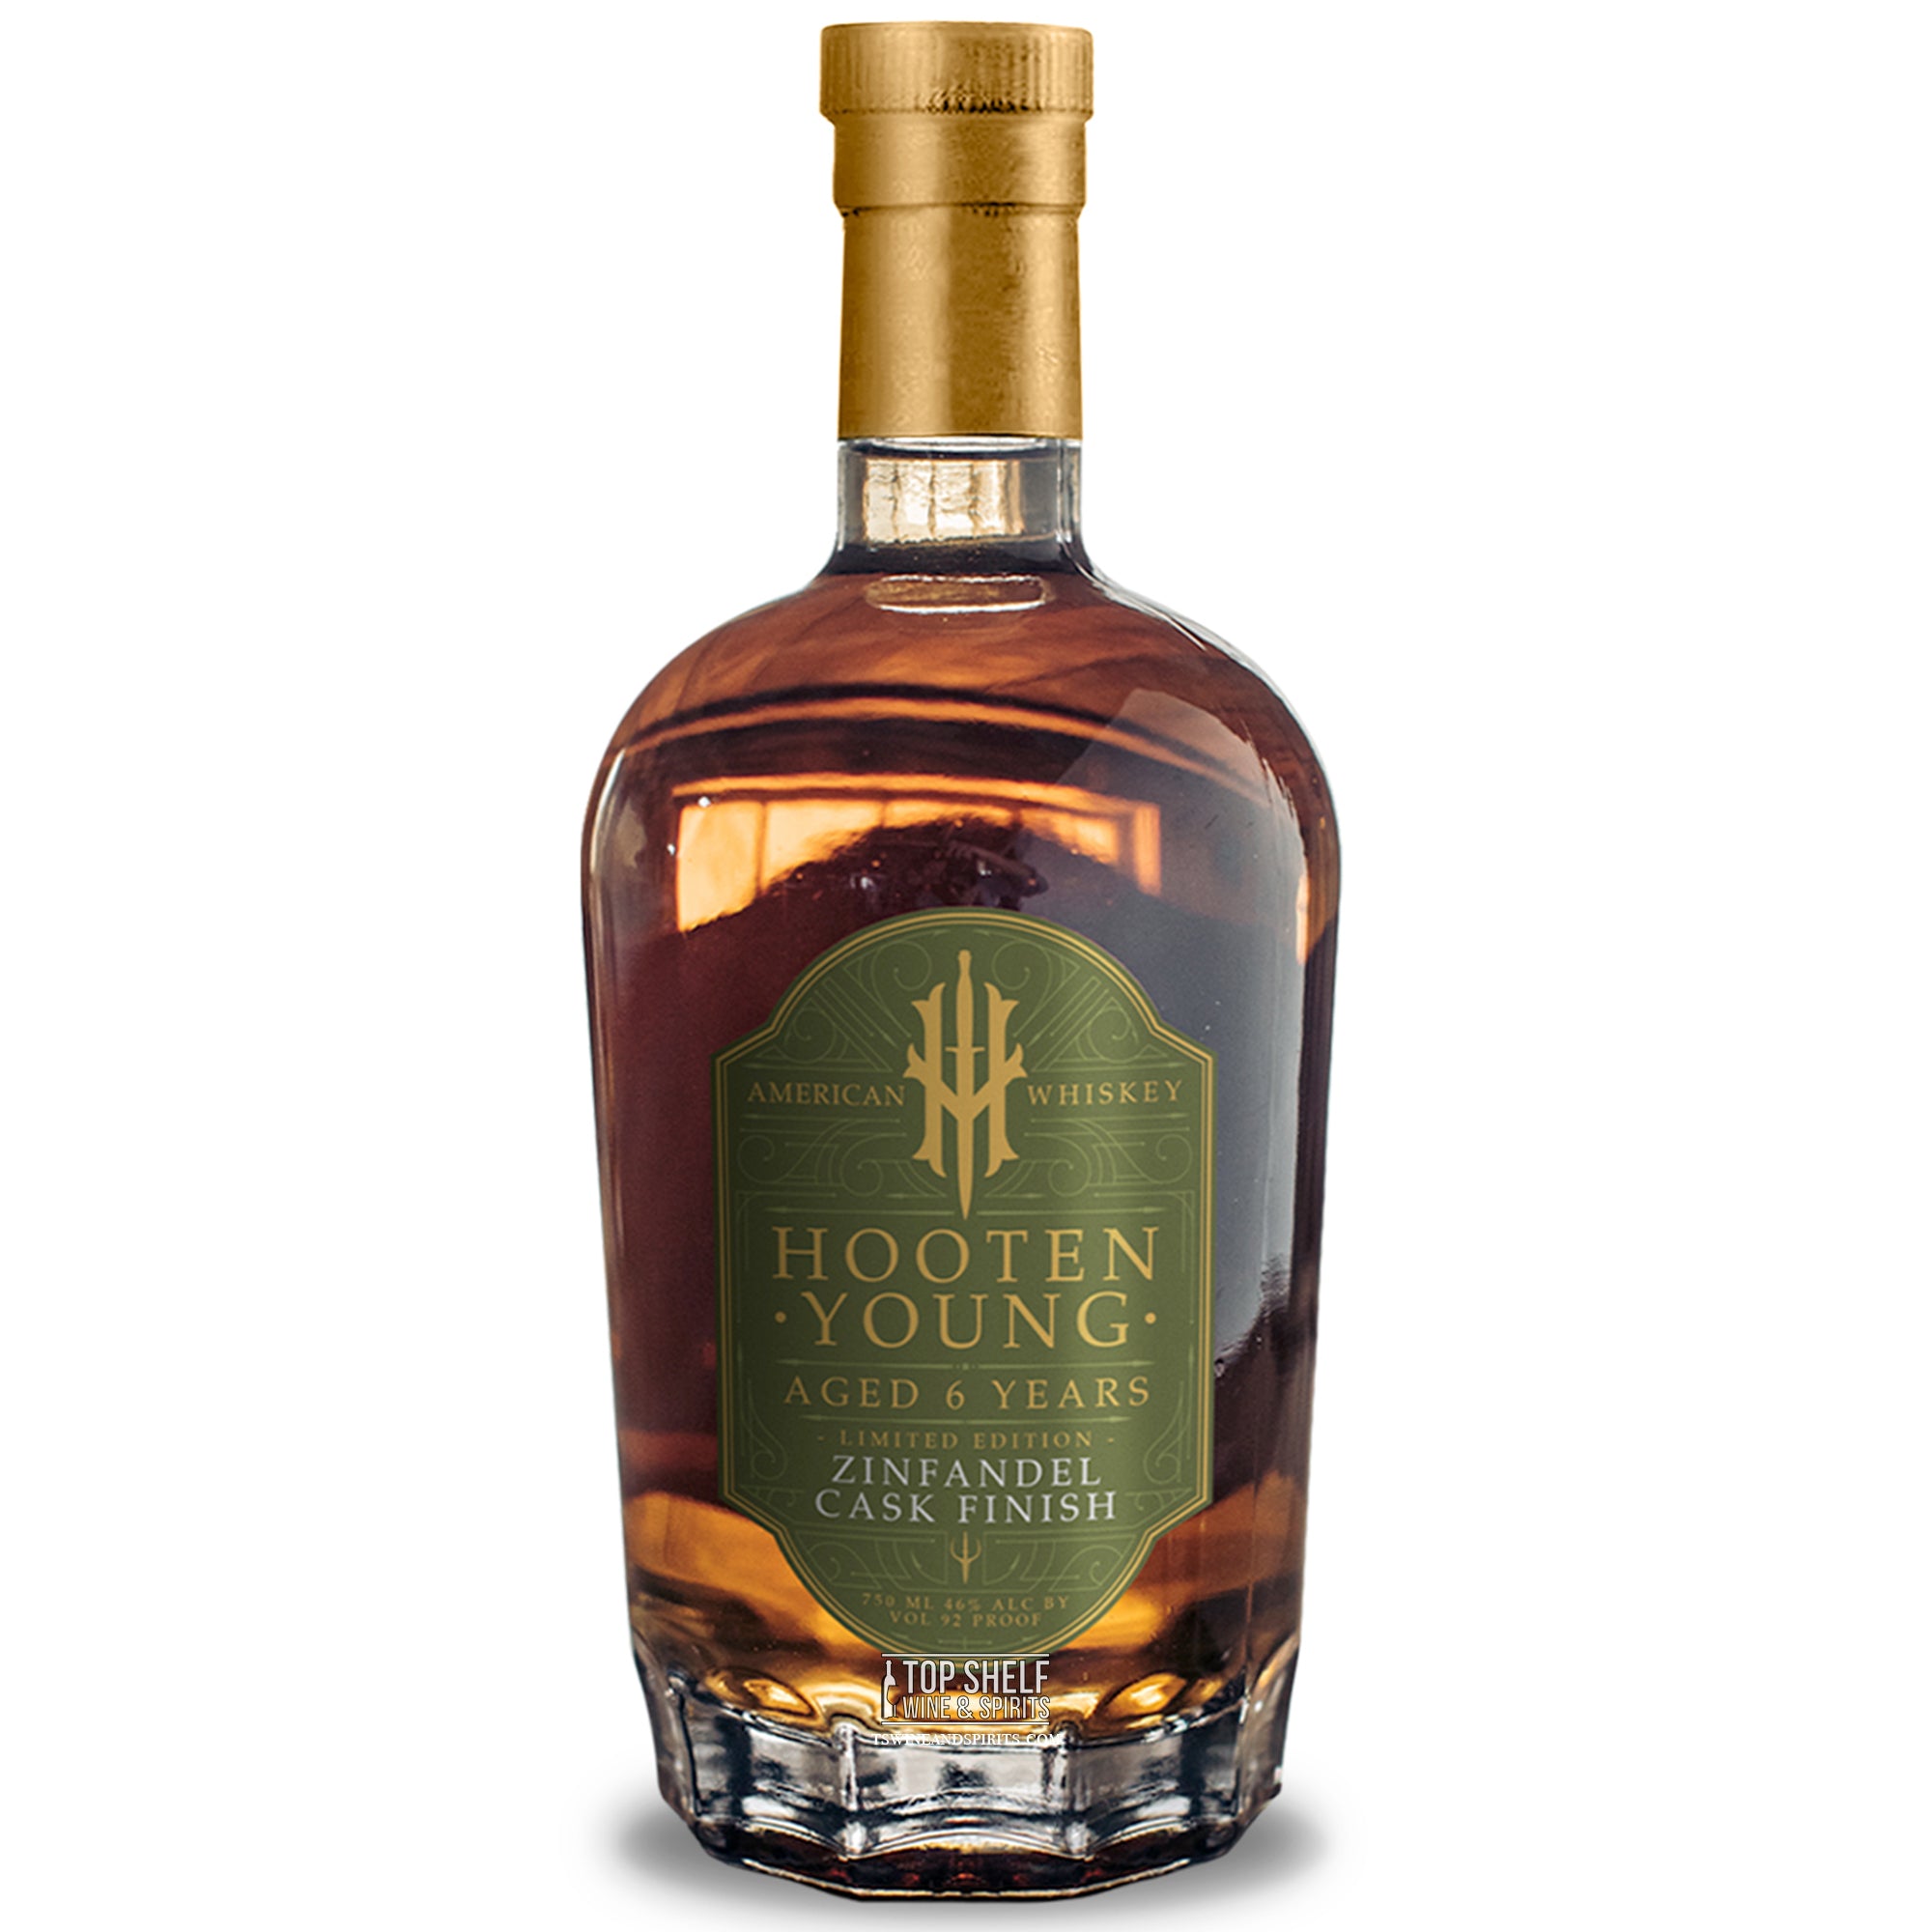 Hooten Young Zinfandel Cask Finish 6 Year American Whiskey